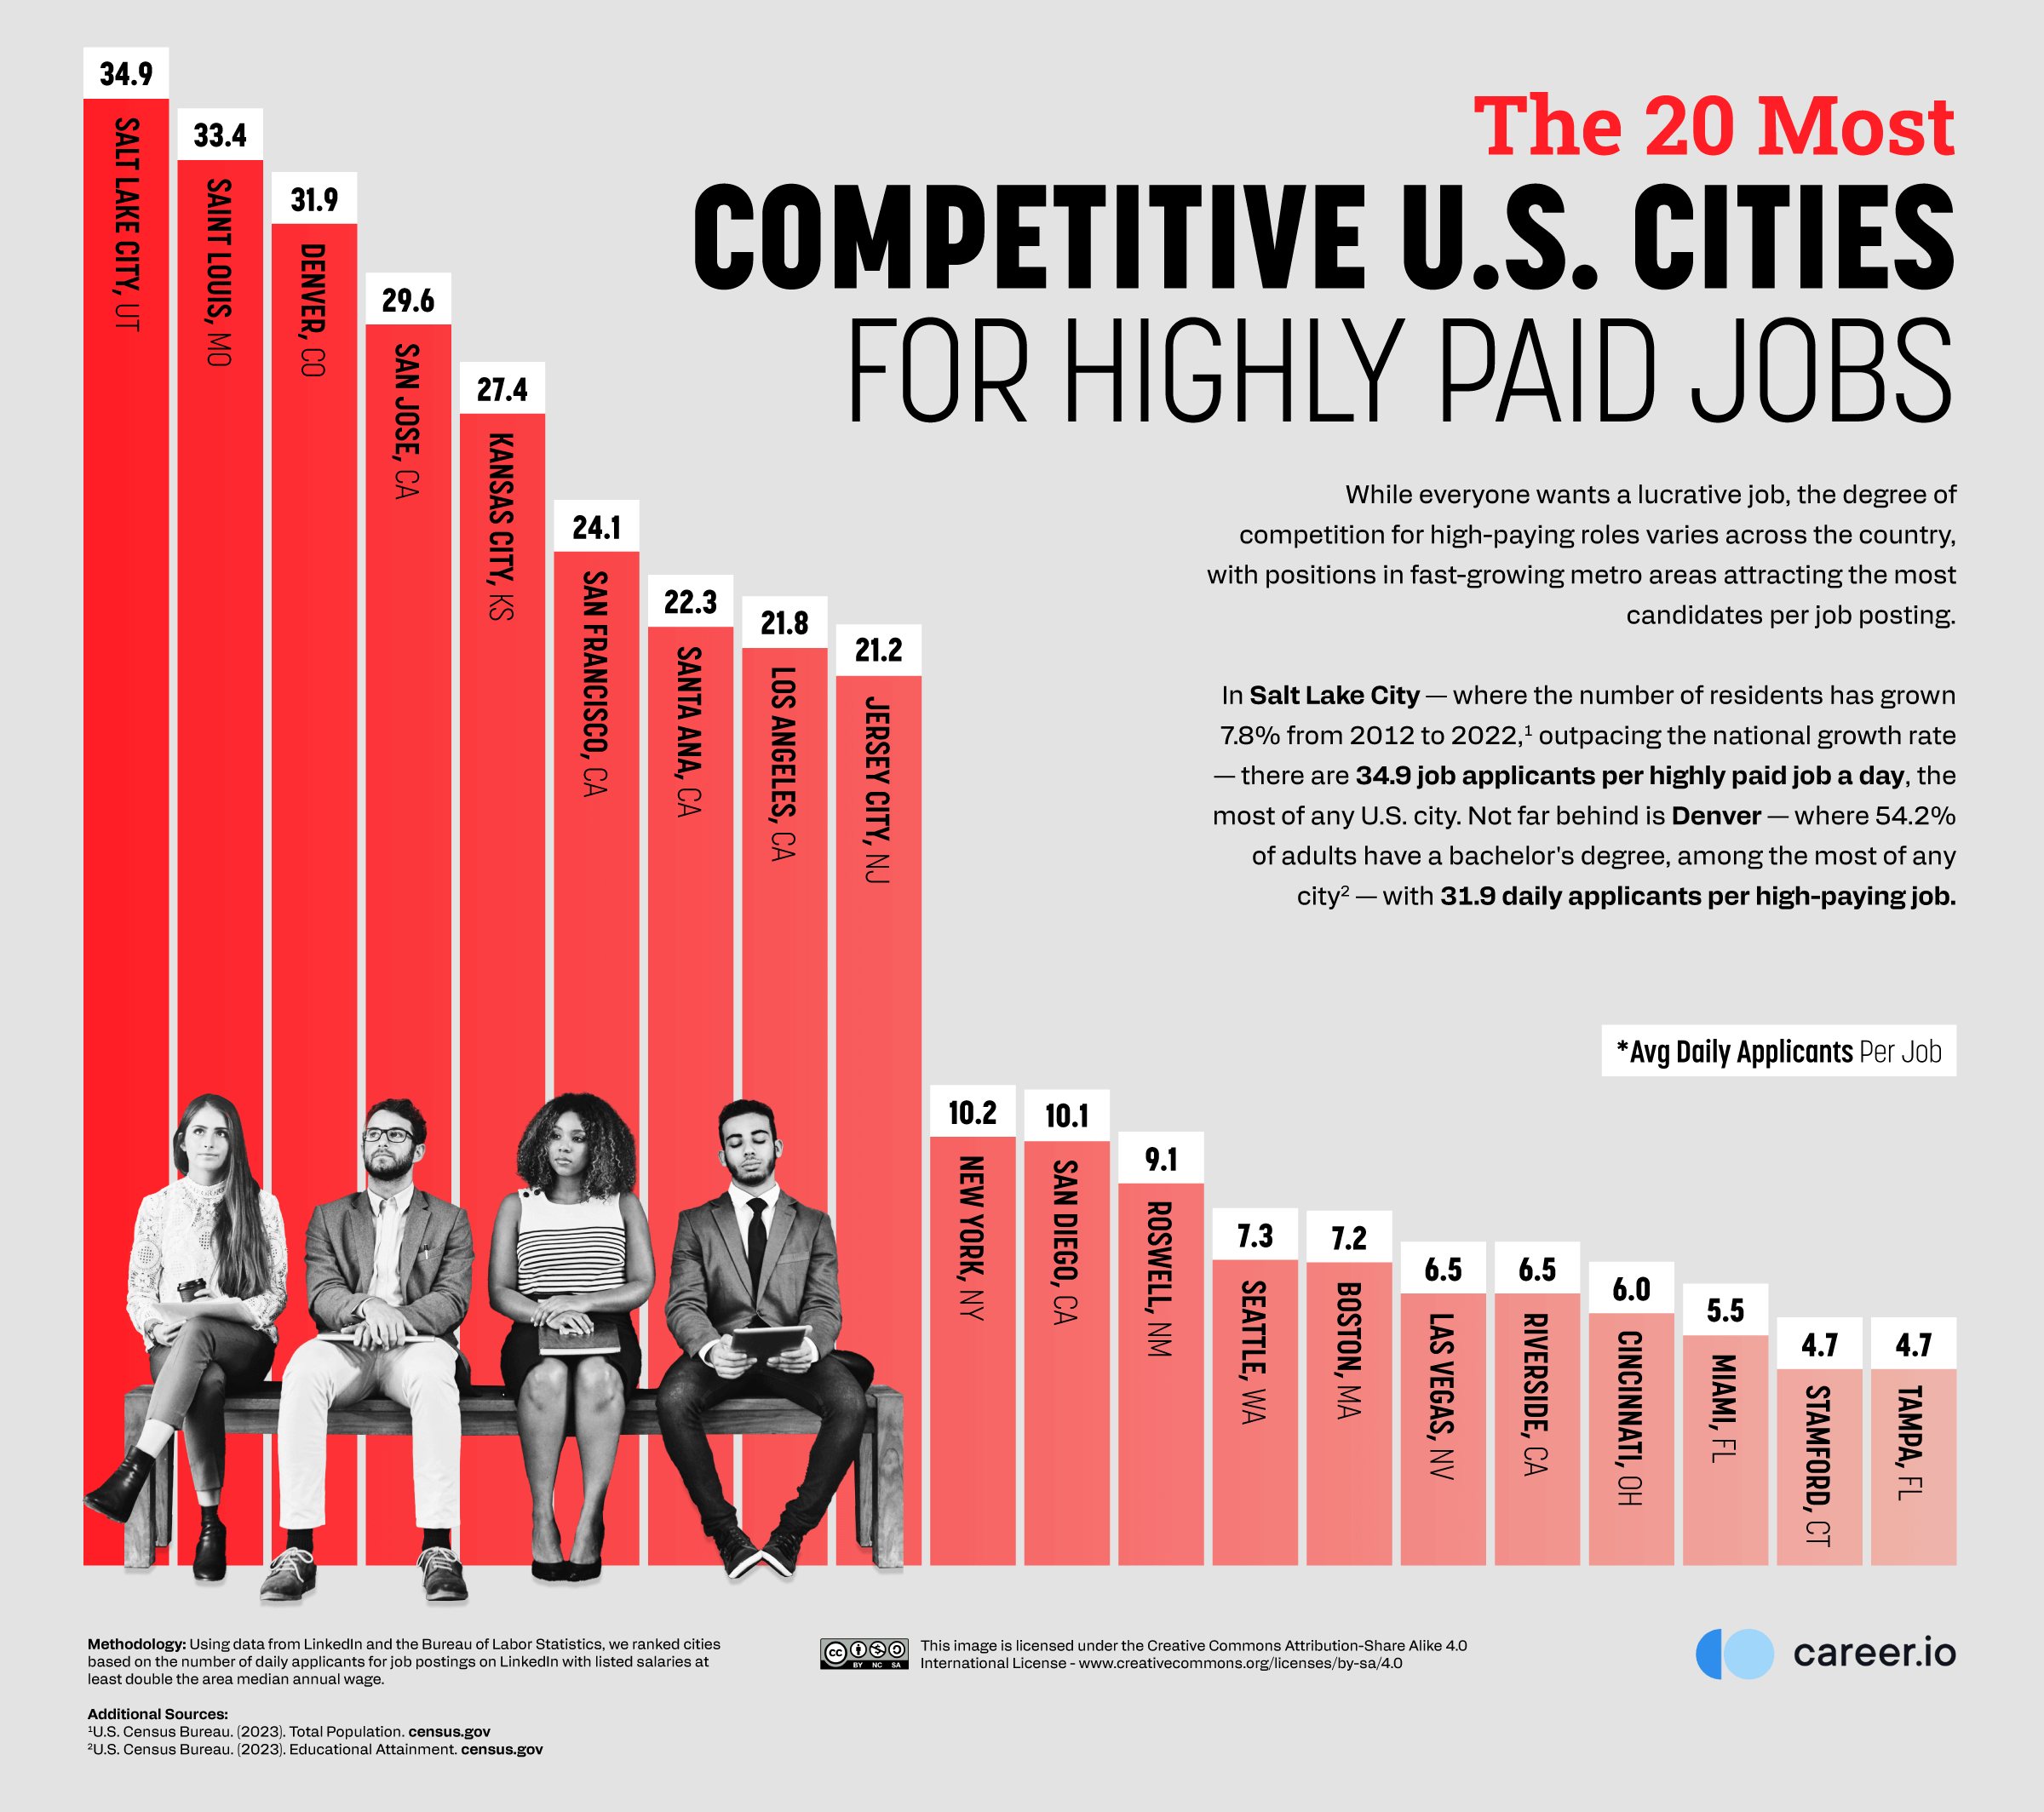 01_The-20-Most-Competitive-US-Cities-for-Highly-Paid-Jobs.png